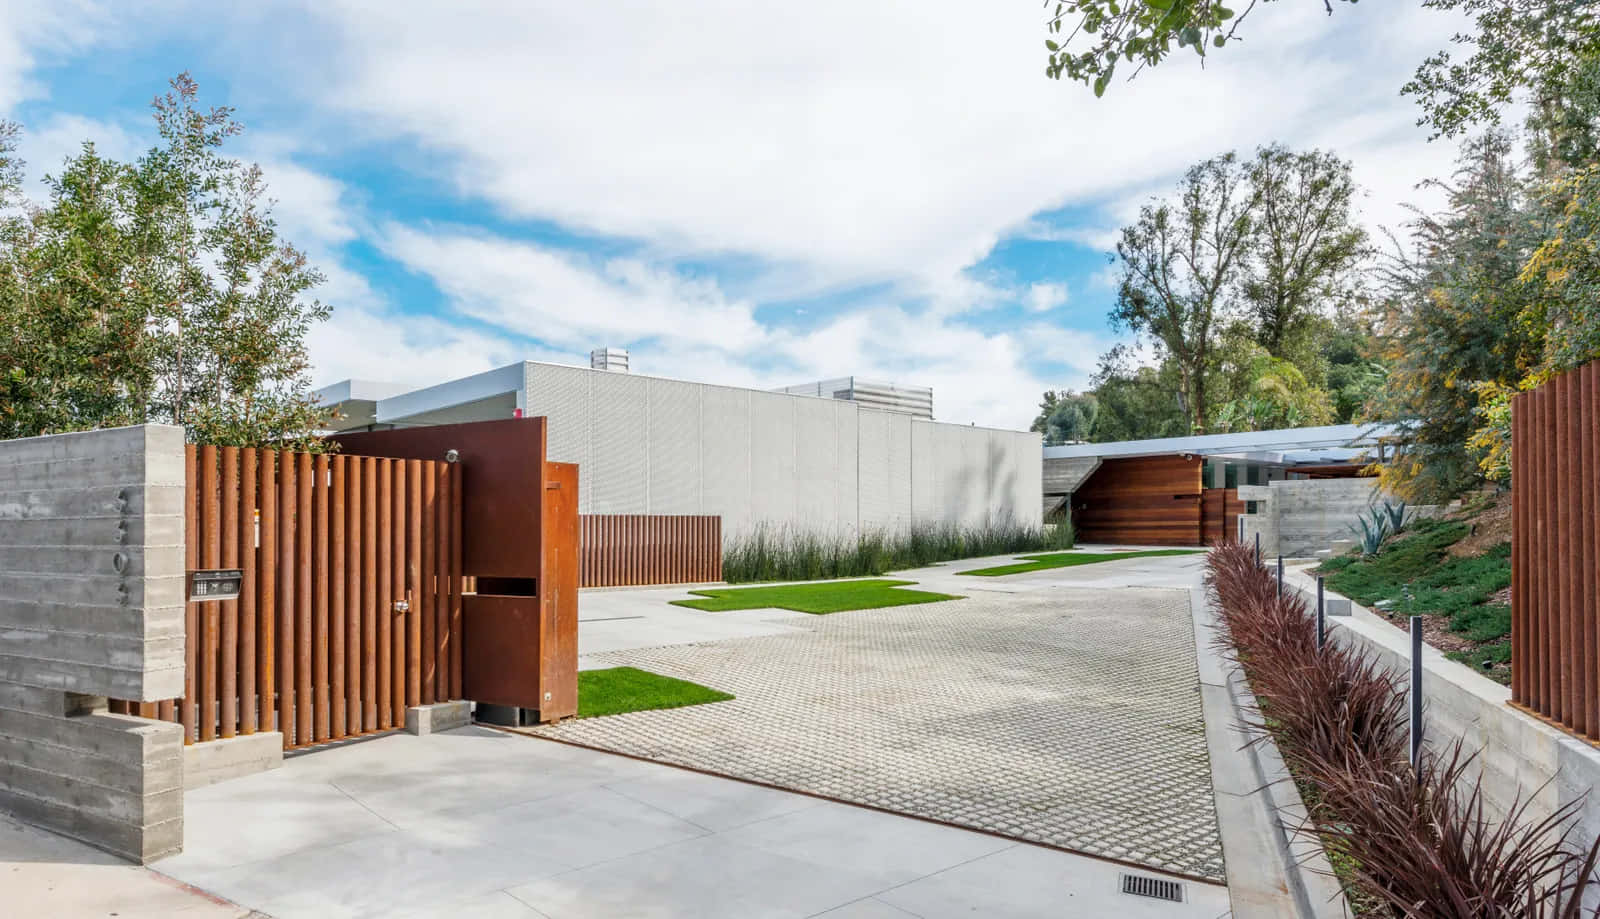 A Modern Home With A Wooden Gate And A Wooden Fence